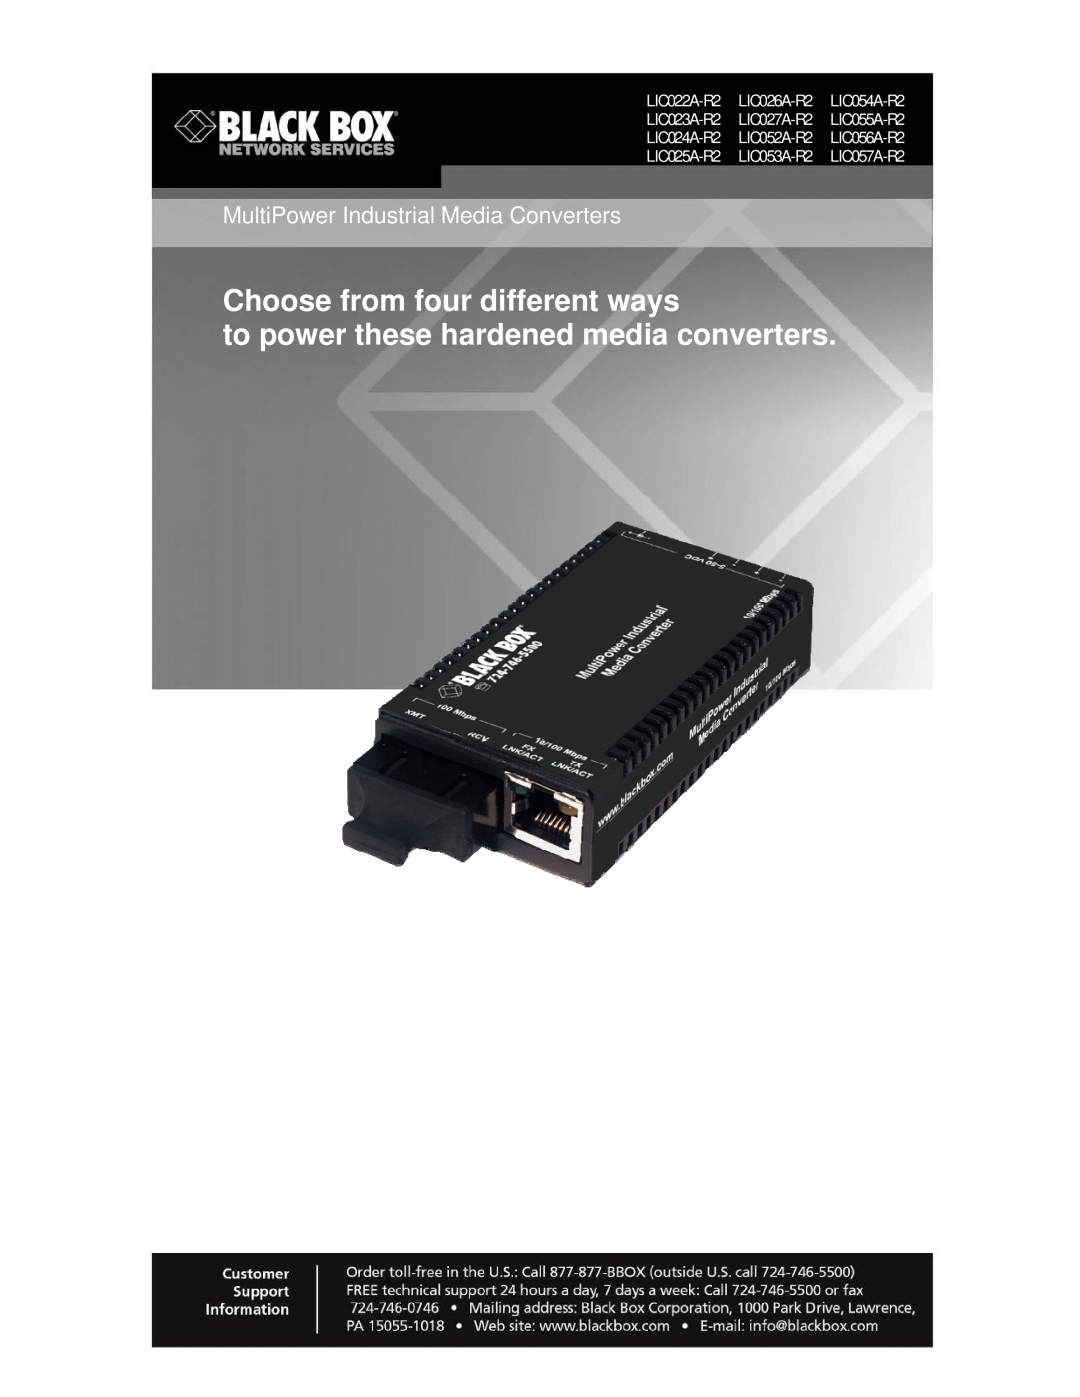 Black Box LIC025A-R2, LIC057A-R2 manual Choose from four different ways, to power these hardened media converters 